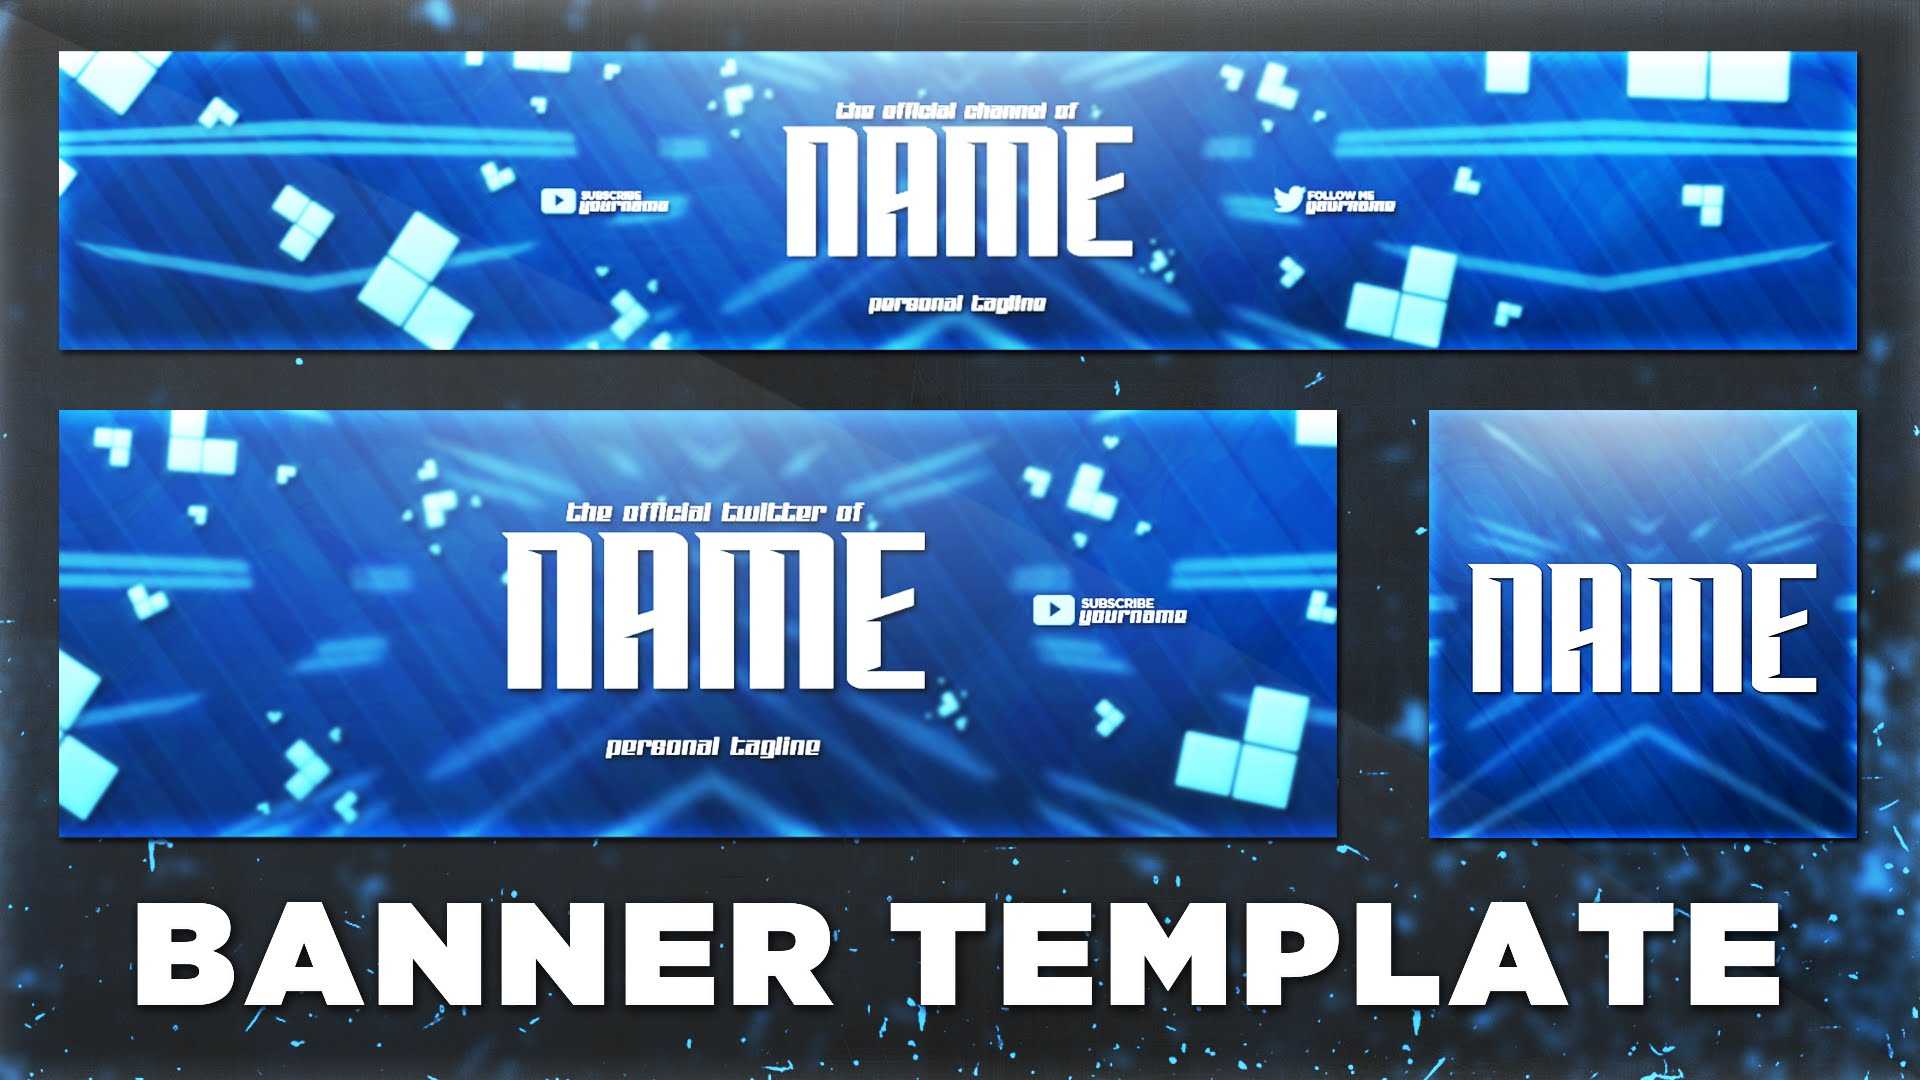 Sick Youtube Banner Template Psd (Photoshop Cc + Cs6) | Free Throughout Banner Template For Photoshop